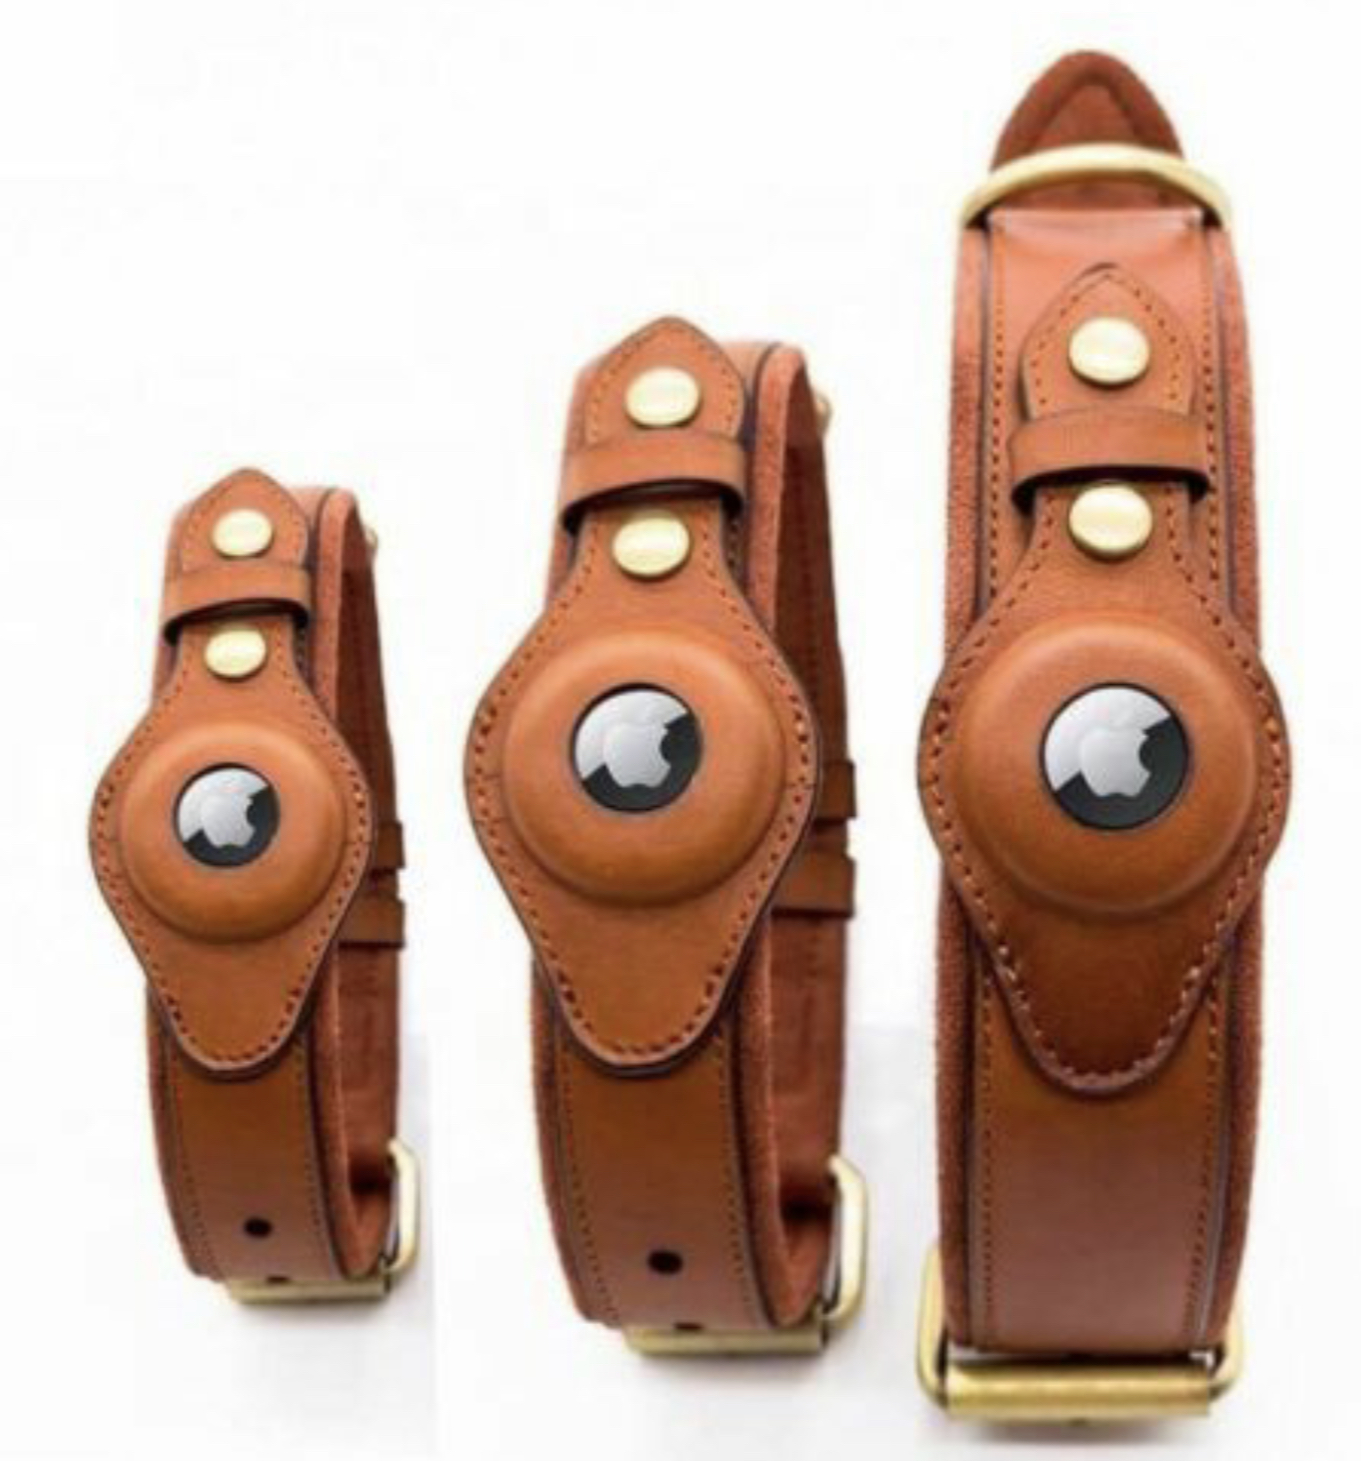 Genuine Leather Dog Collar with air tag holder.